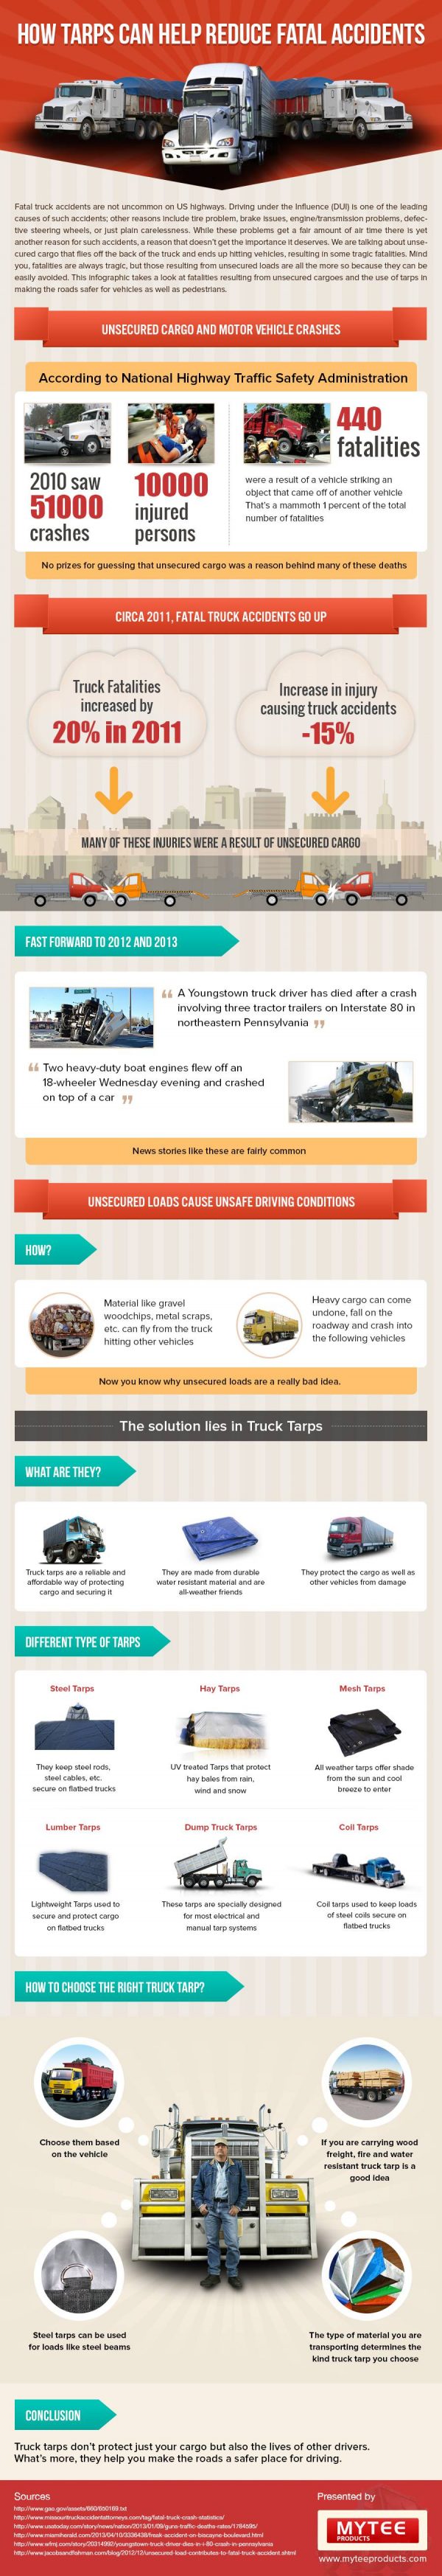 How Tarps Can Help Reduce Fatal Accidents [Infographic]